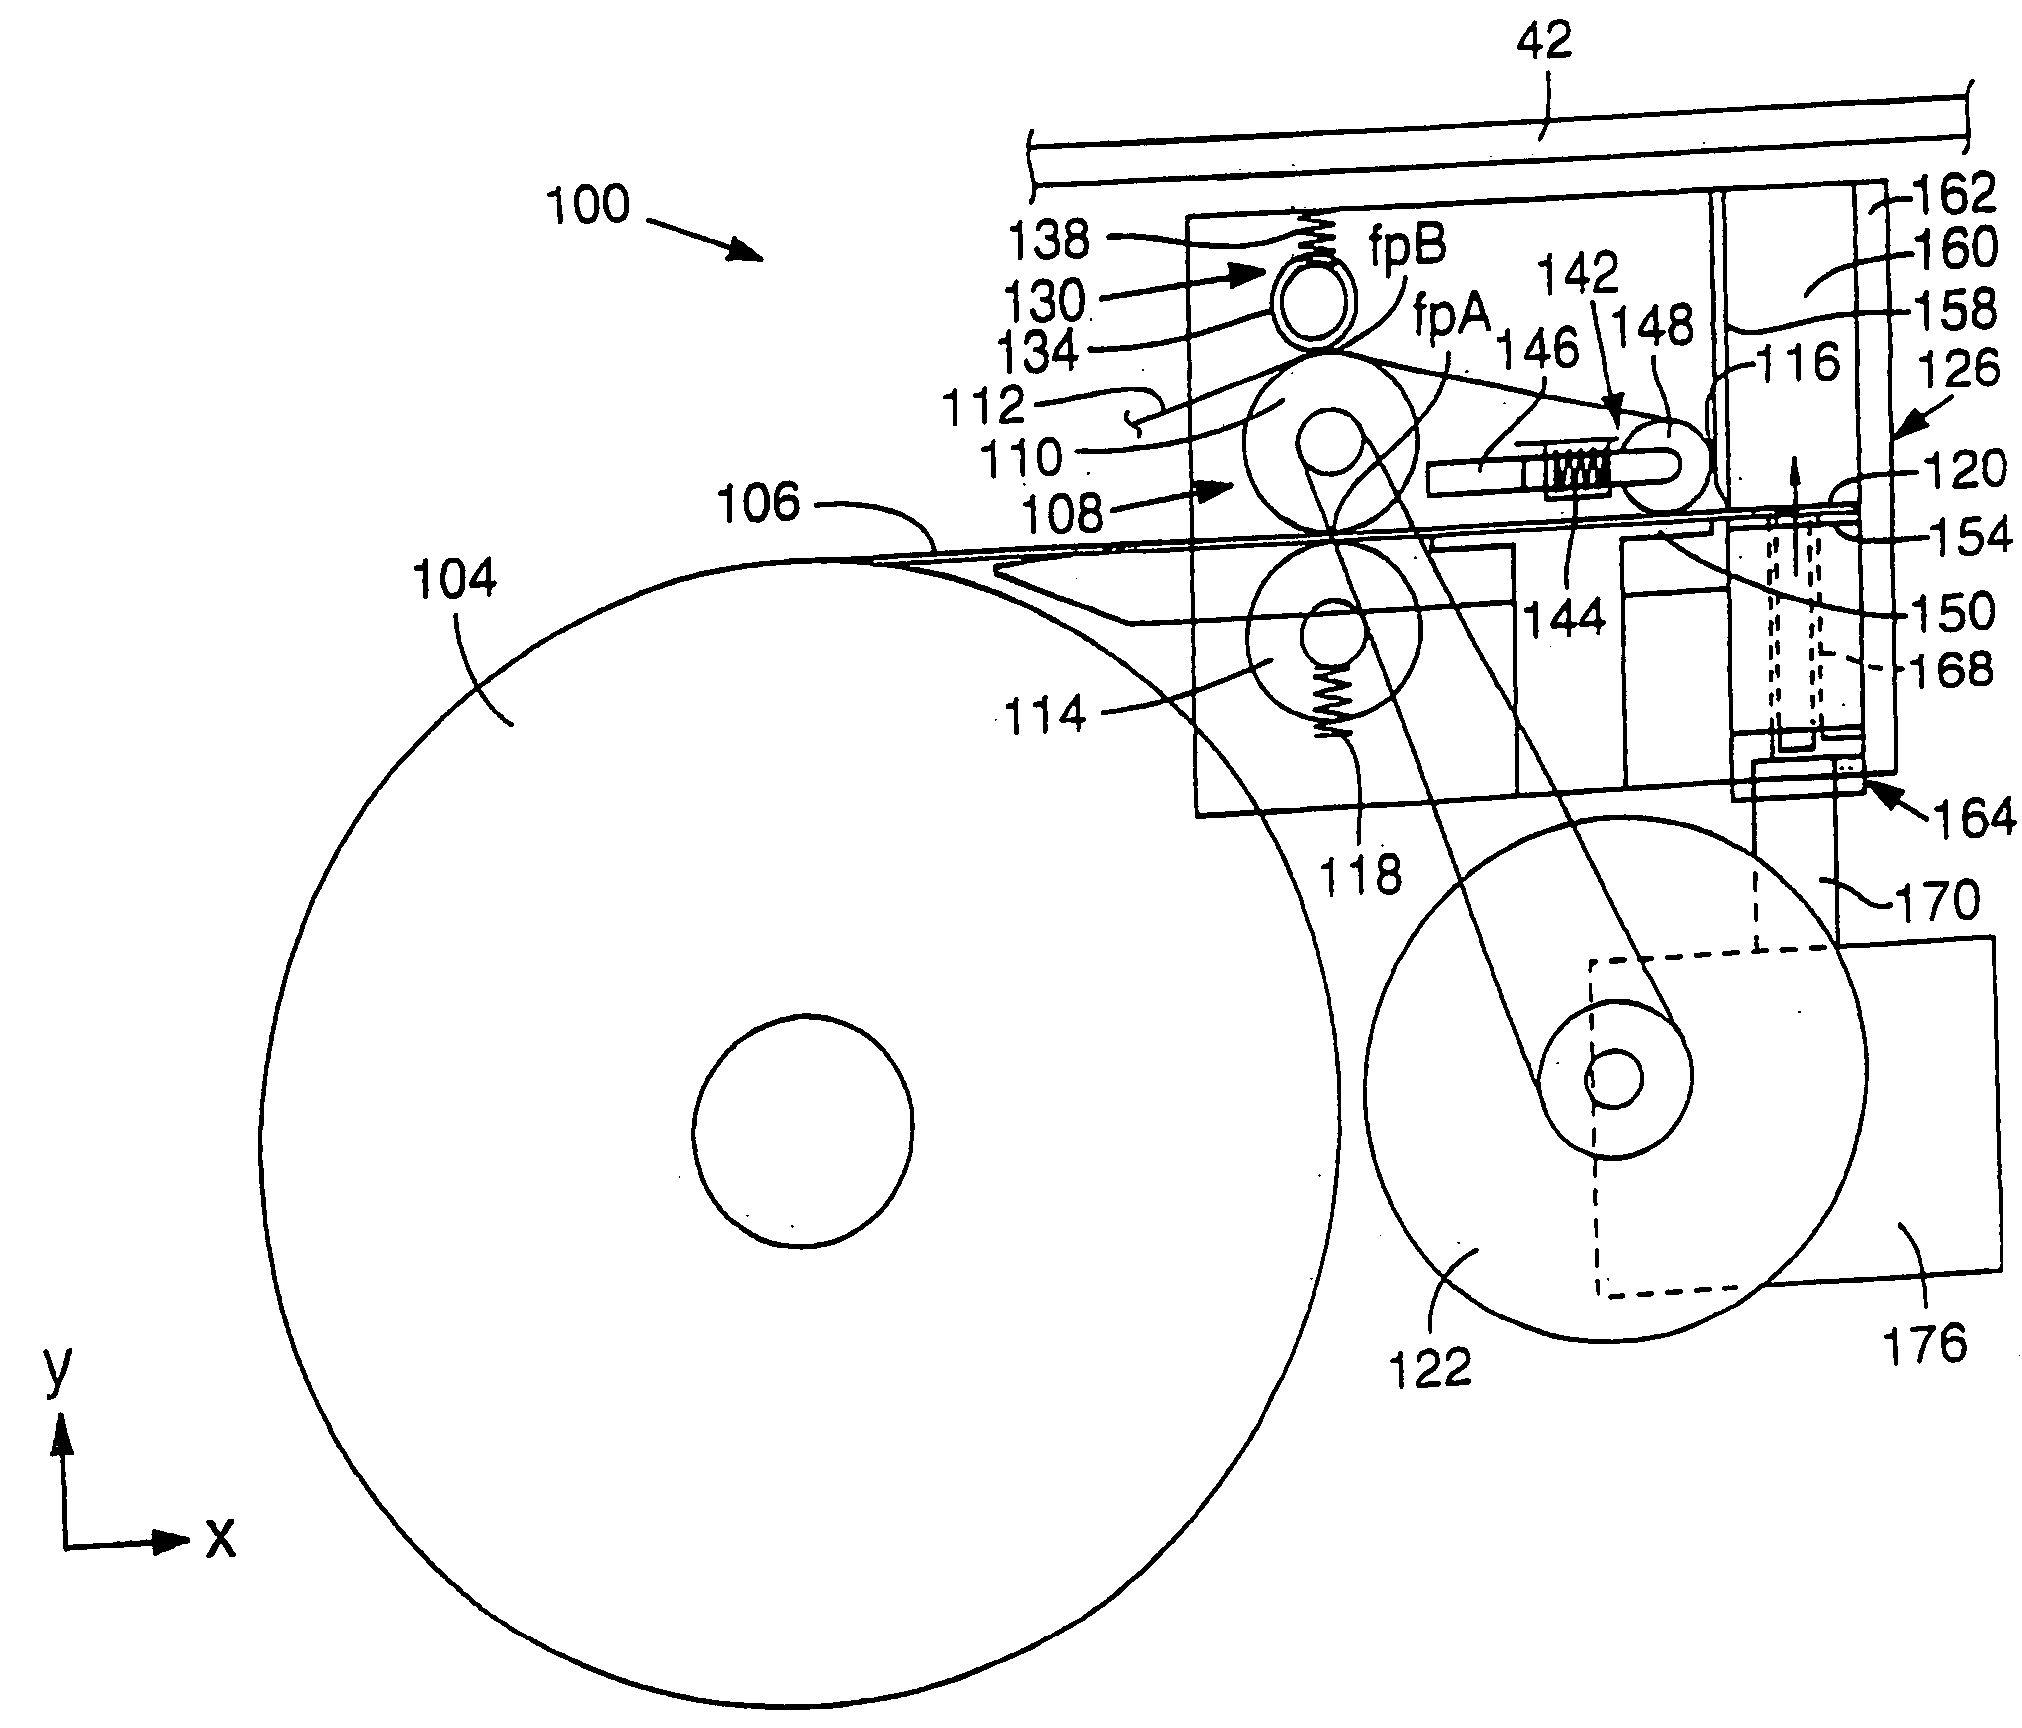 Apparatus and methods for coverlay removal and adhesive application